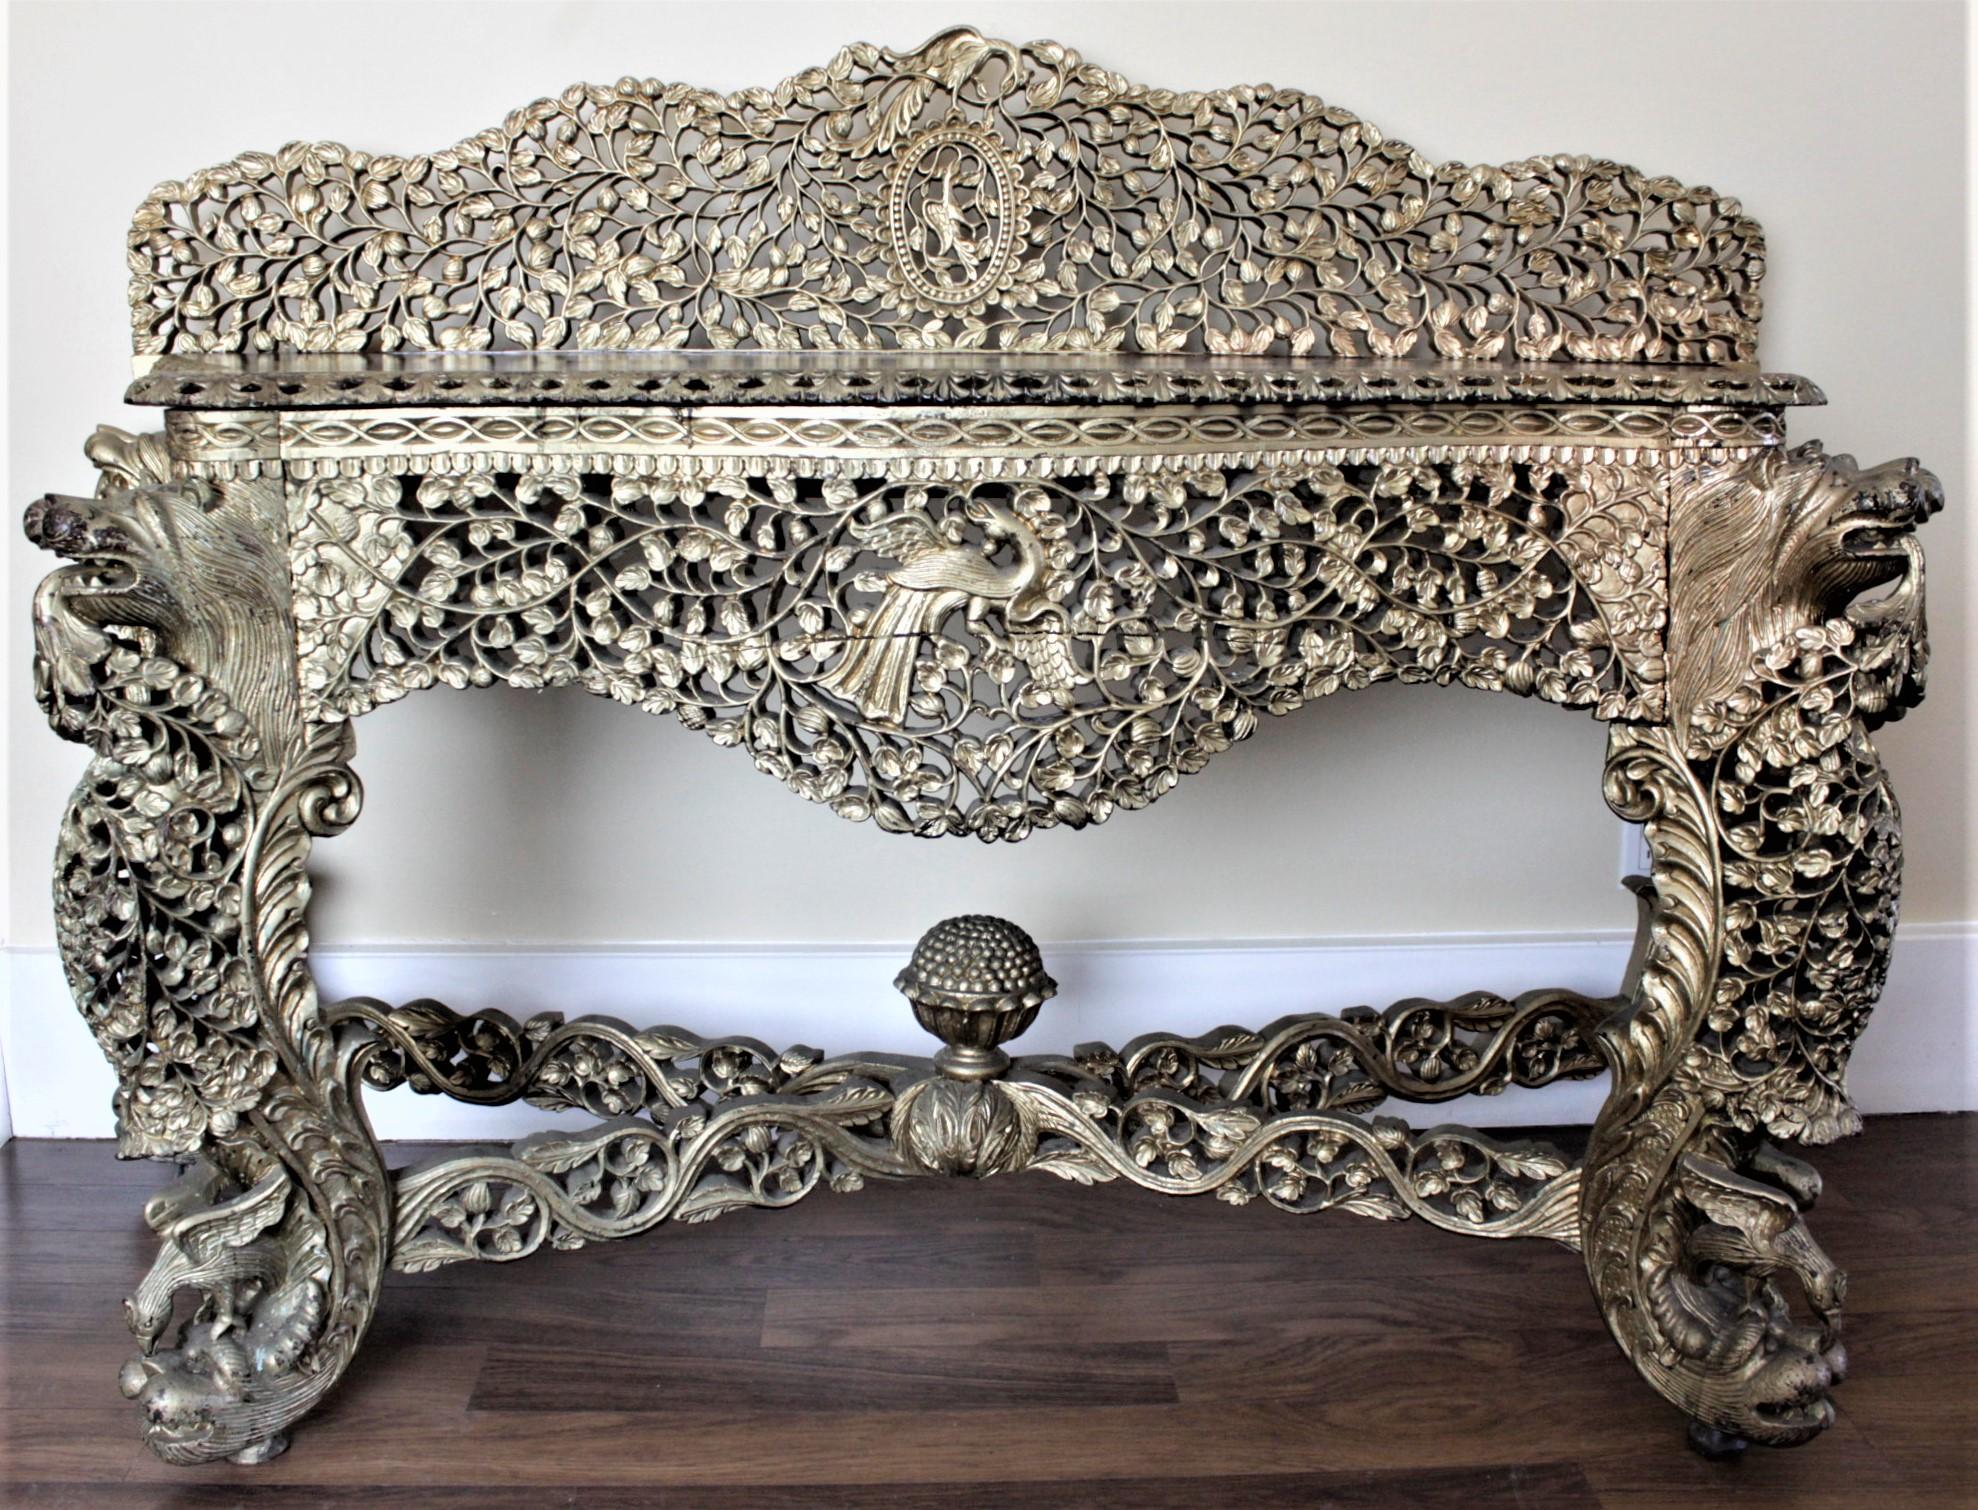 This antique and ornately hand-carved console table is unsigned, but presumed to have been made in India in approximately 1880 in the period Anglo-Indian style. This large and impressive console table has a serpentine shape with intricately carved